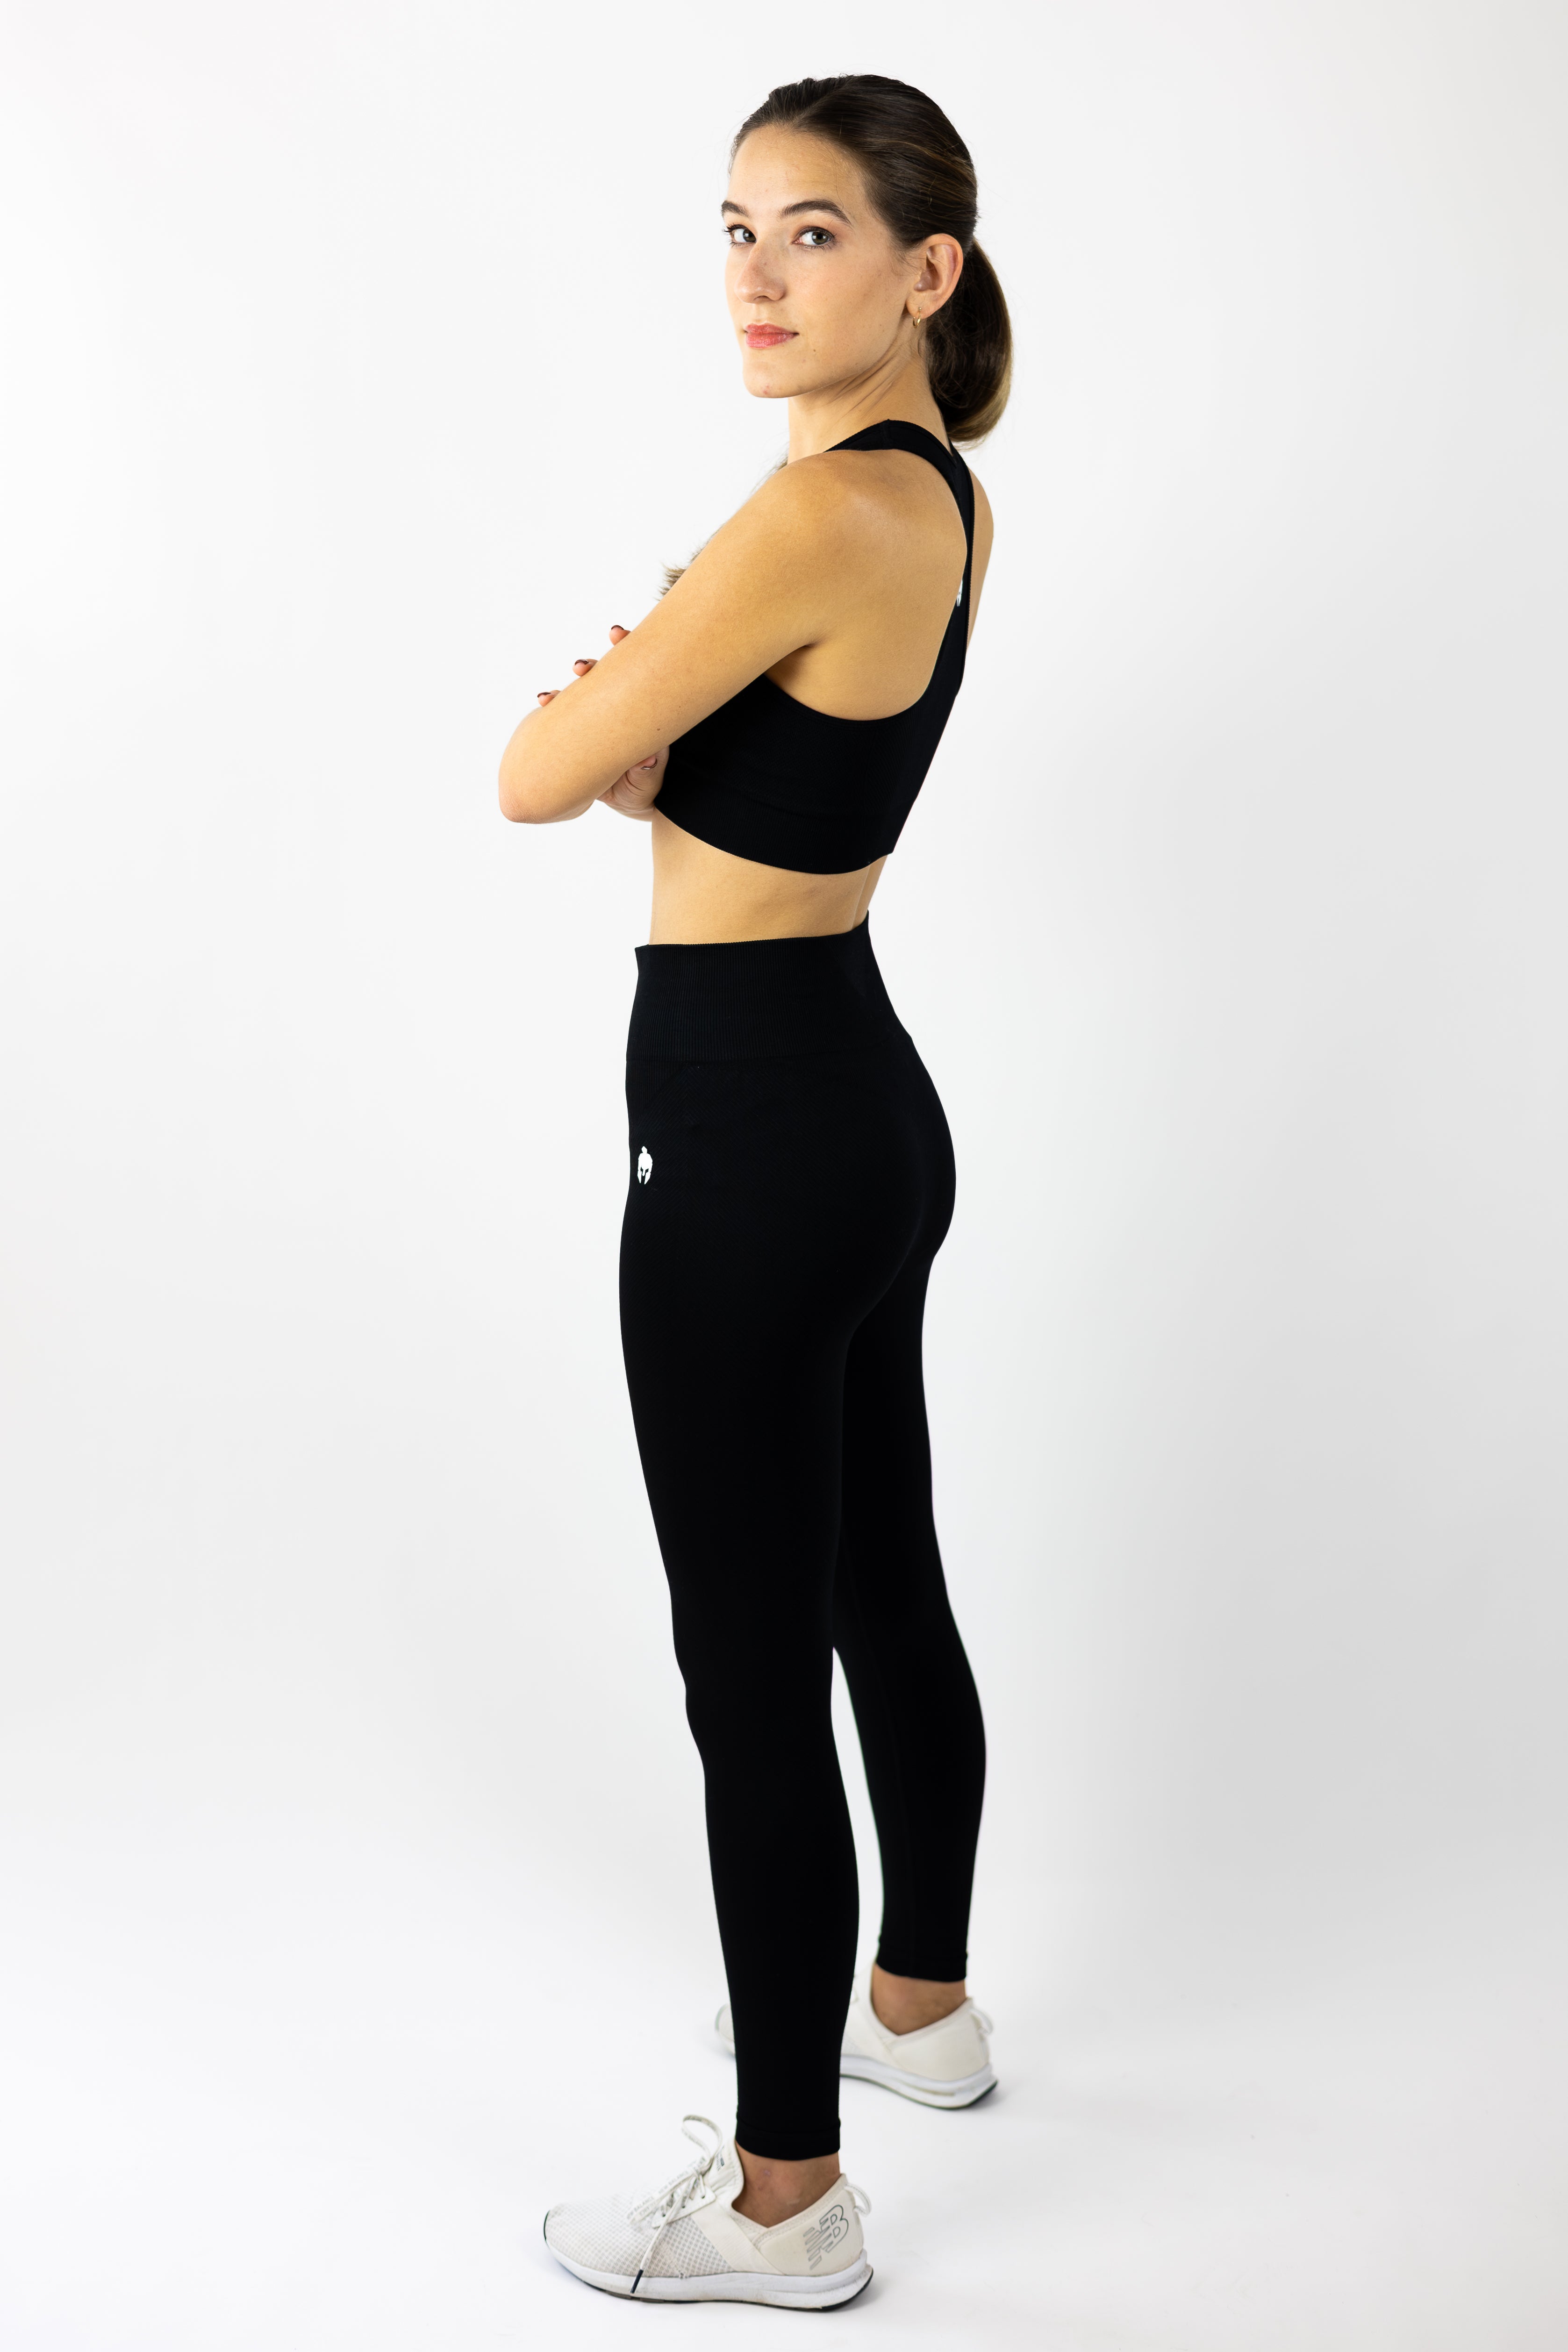 woman modeling Strength of One black yoga pants and sports bra seamless set